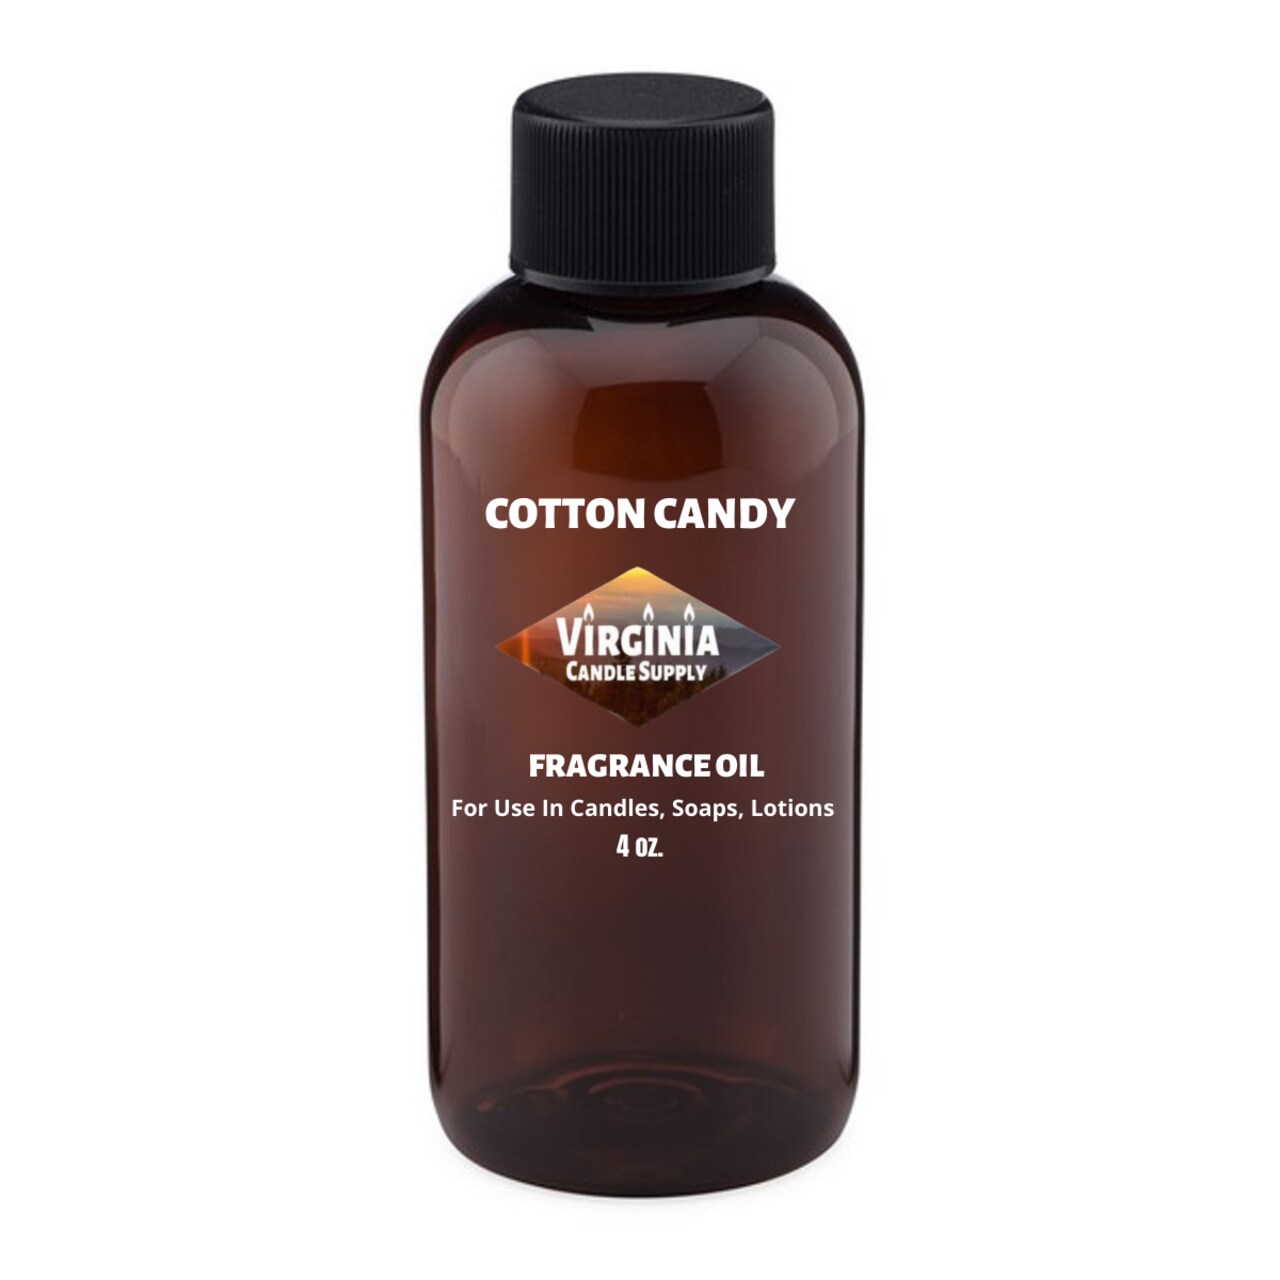 Cotton Candy Fragrance Oil (Our Version of the Brand Name) (4 oz